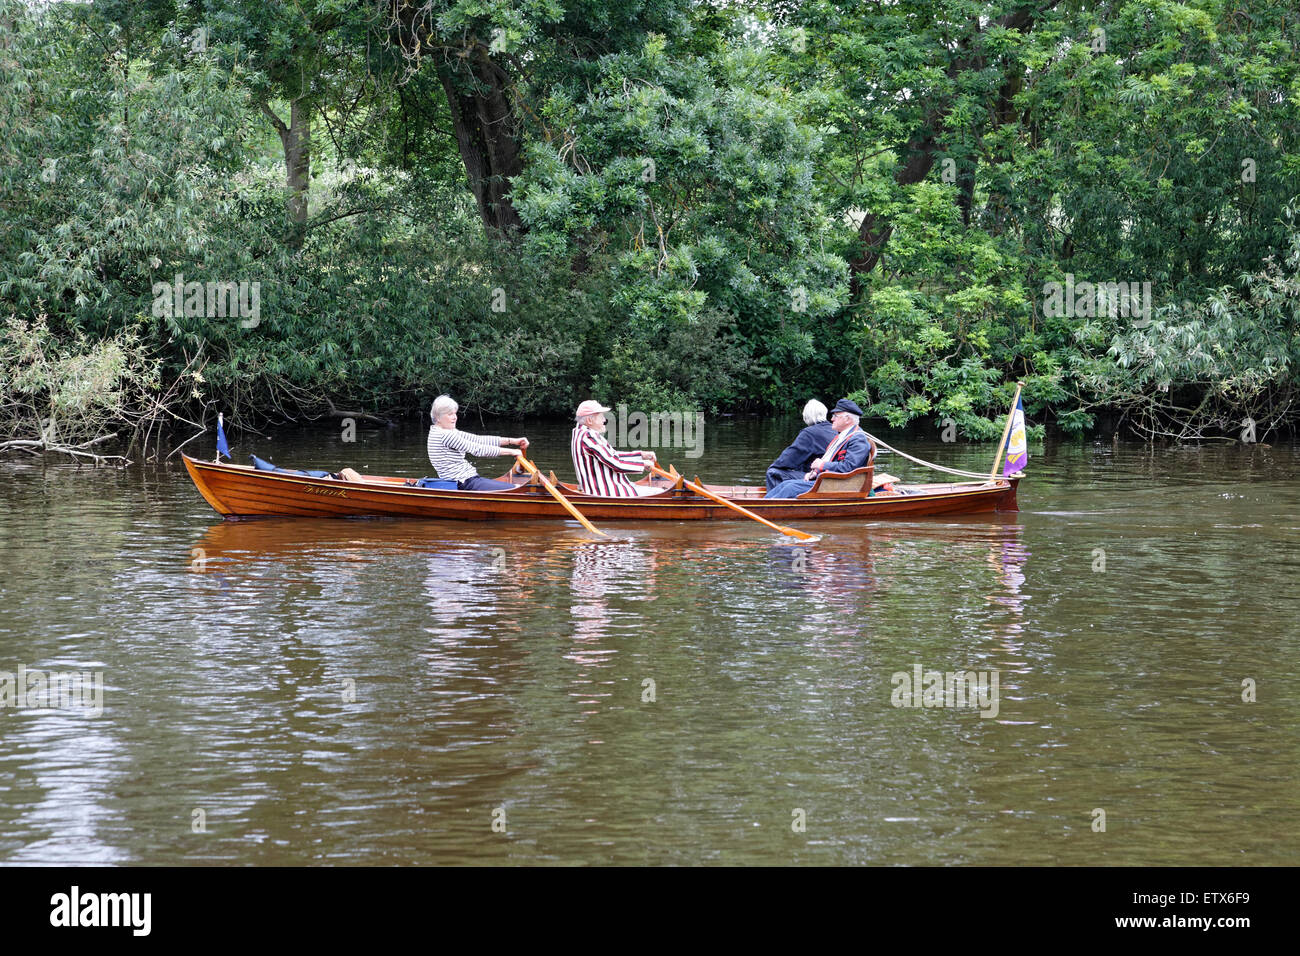 On the River Thames at Runnymede a rowboat works its way upstream Stock Photo